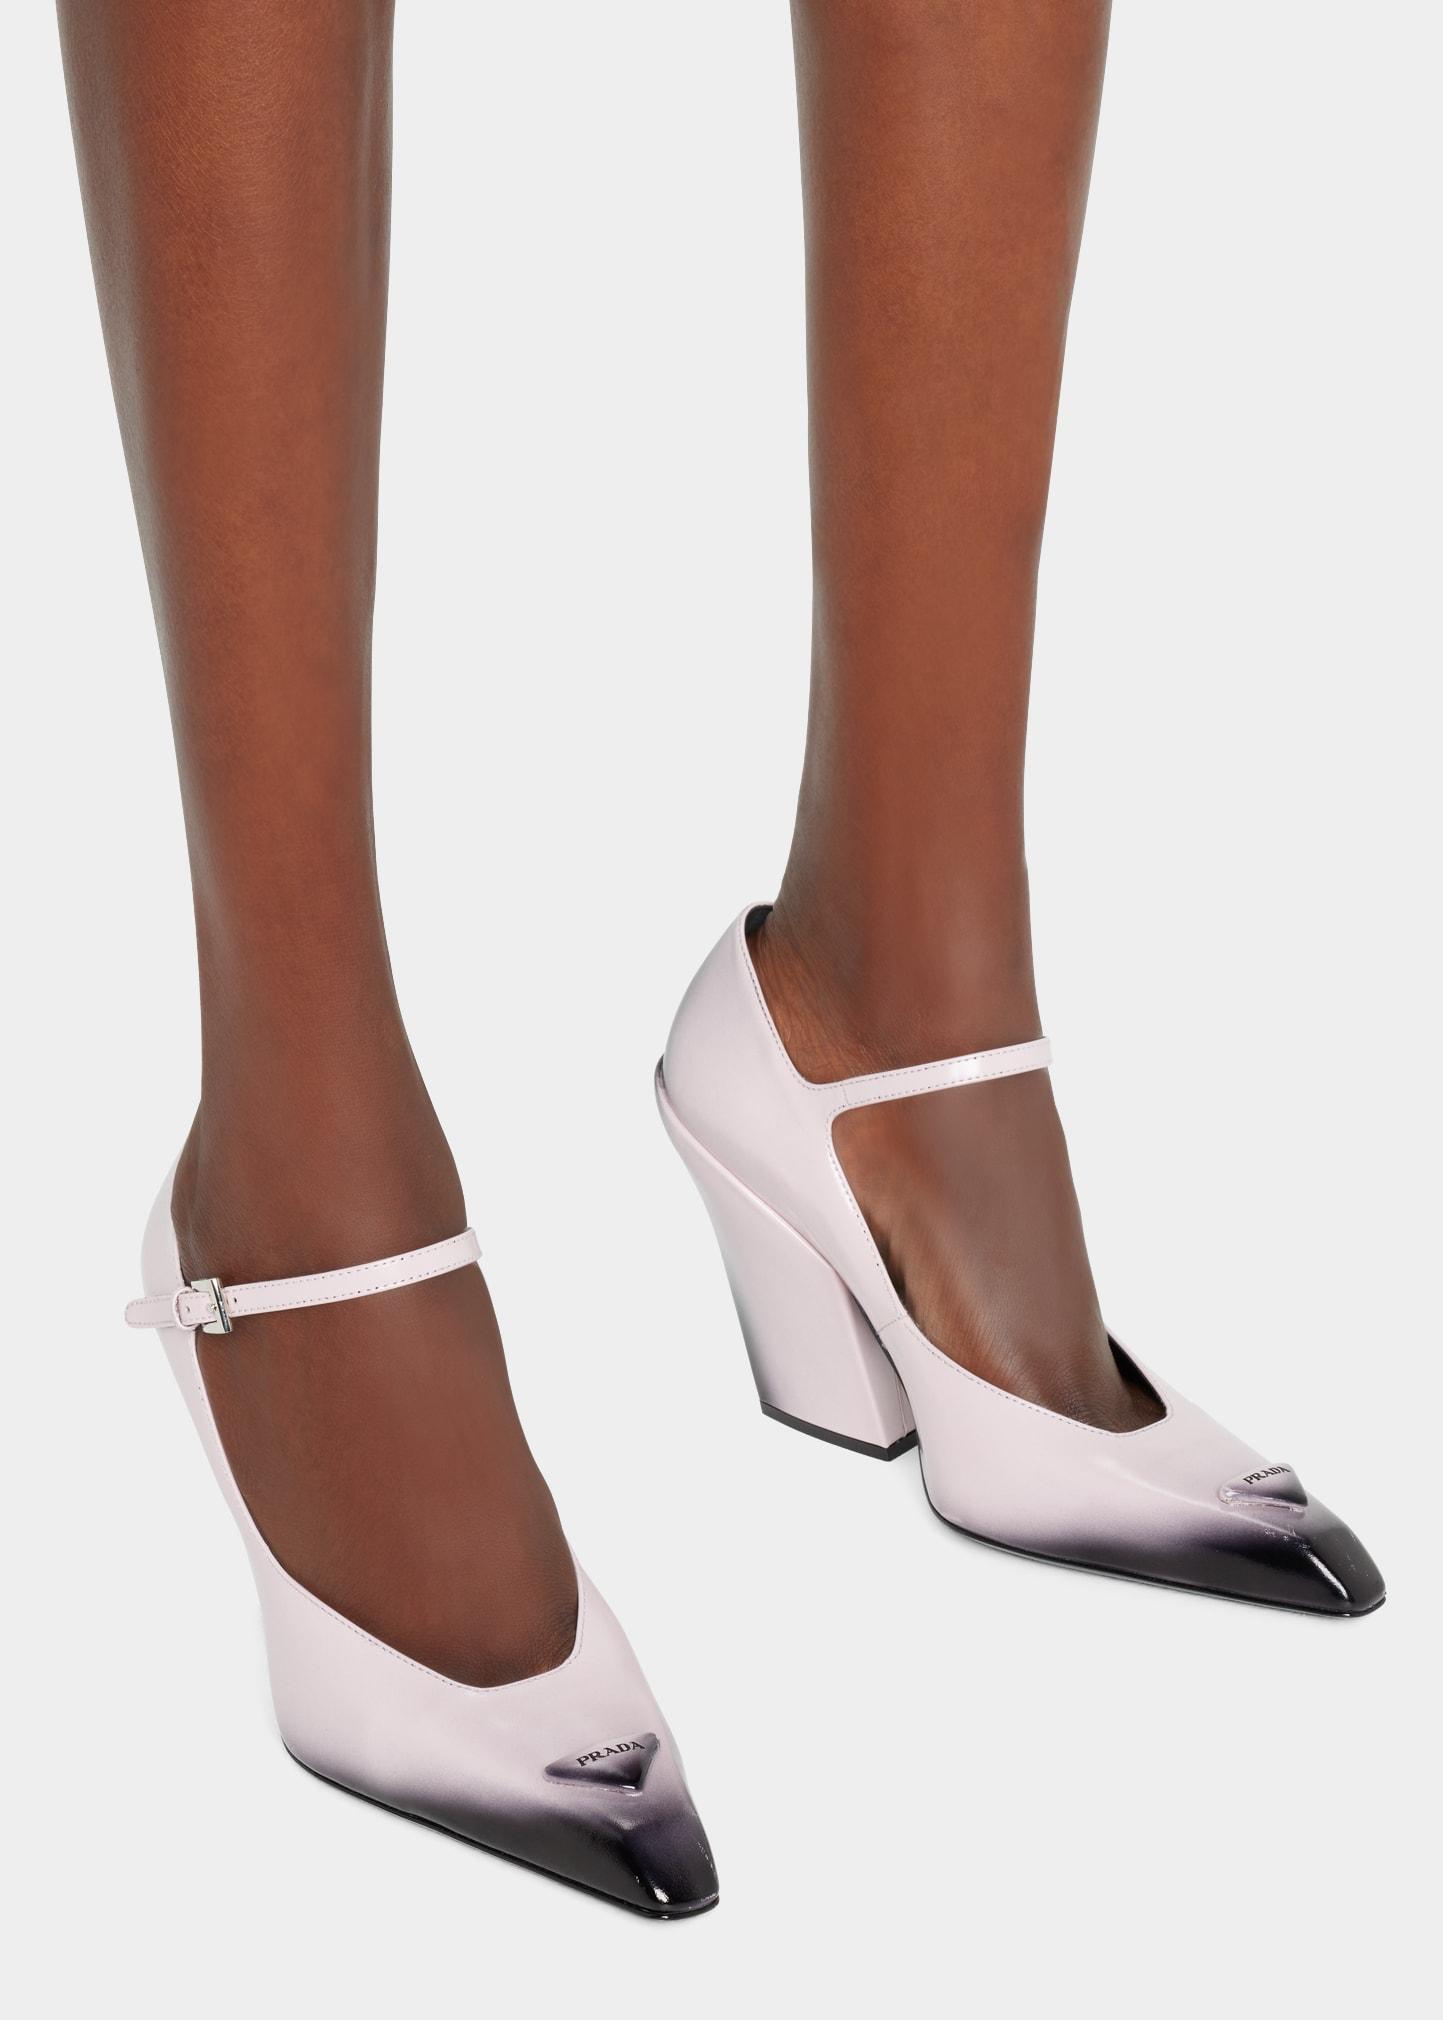 Prada Modellerie Leather Mary Jane Pumps in White | Lyst